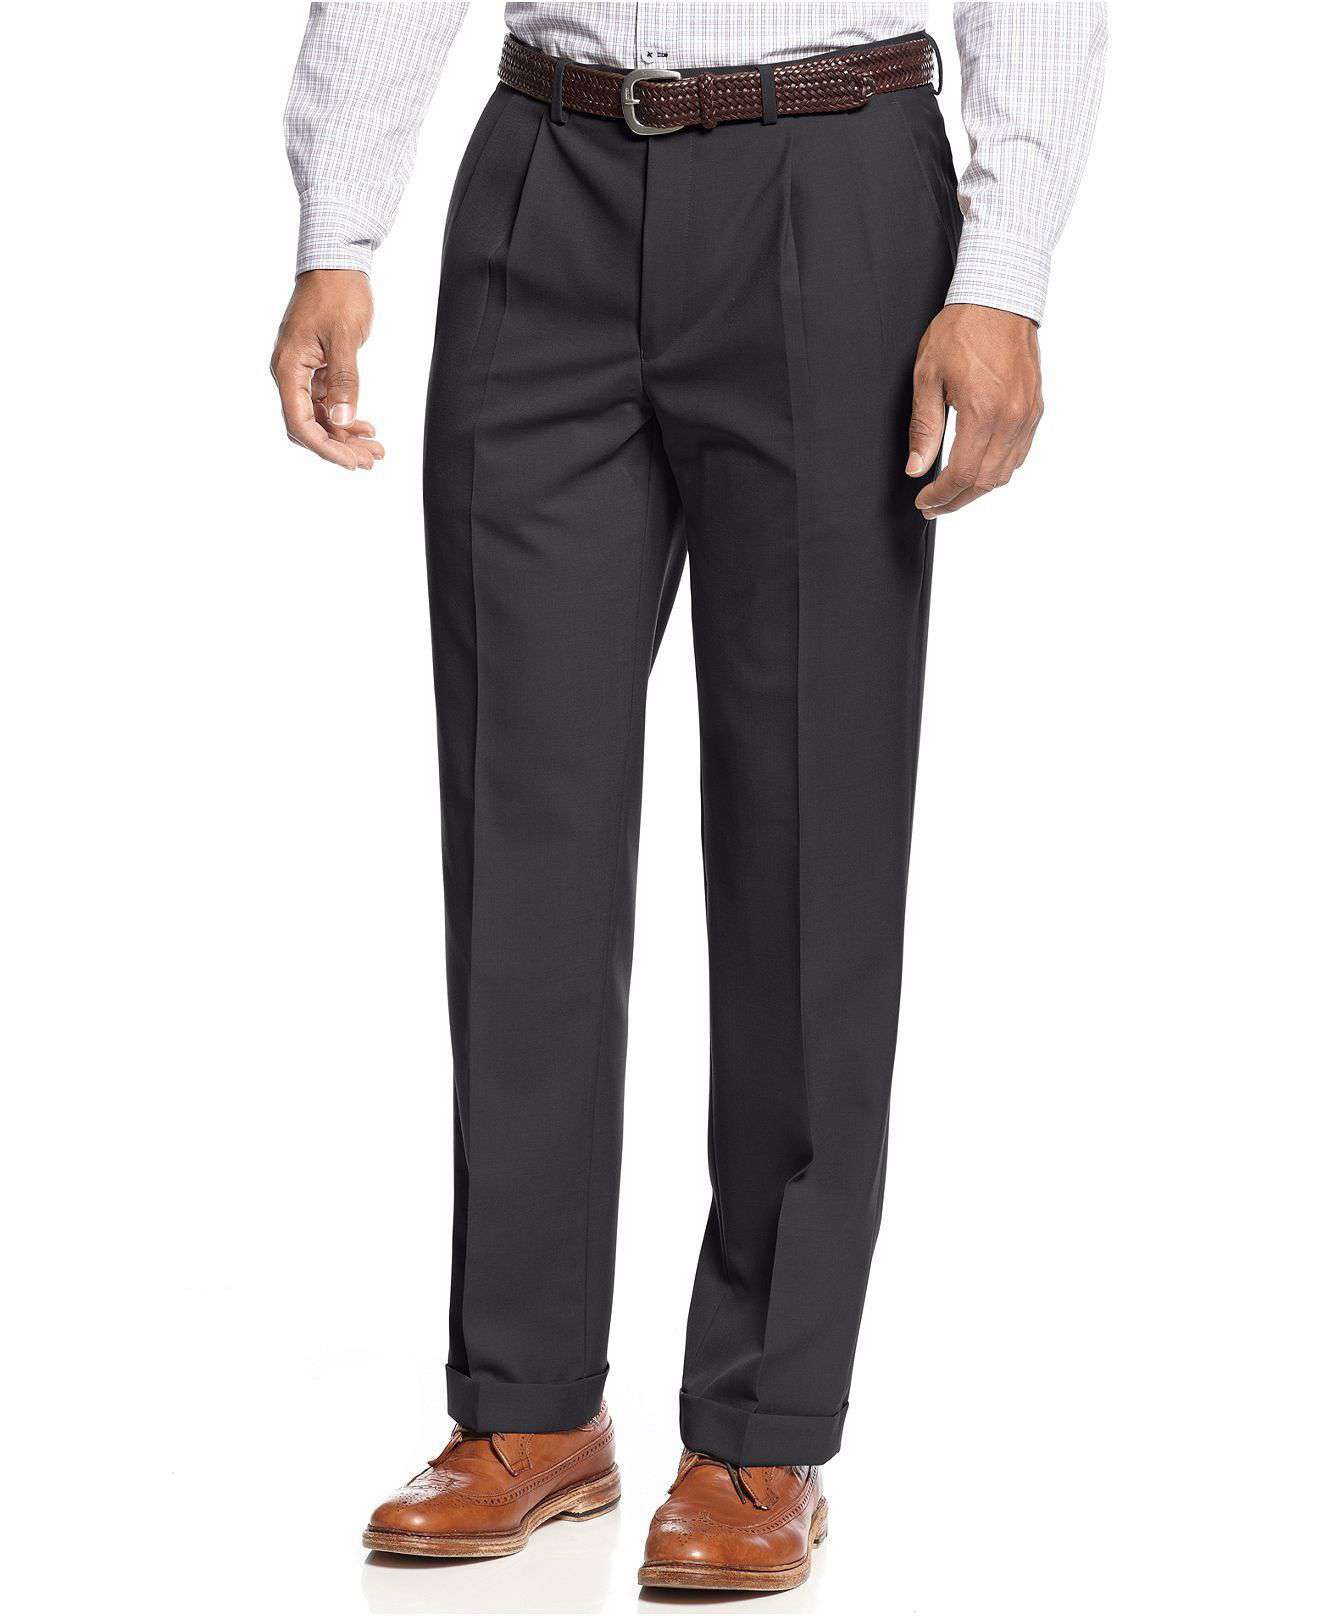 Polo Ralph Lauren Men's Stretch Straight Fit Dress Pants-GH-33WX30L Grey  Heather at Amazon Men's Clothing store